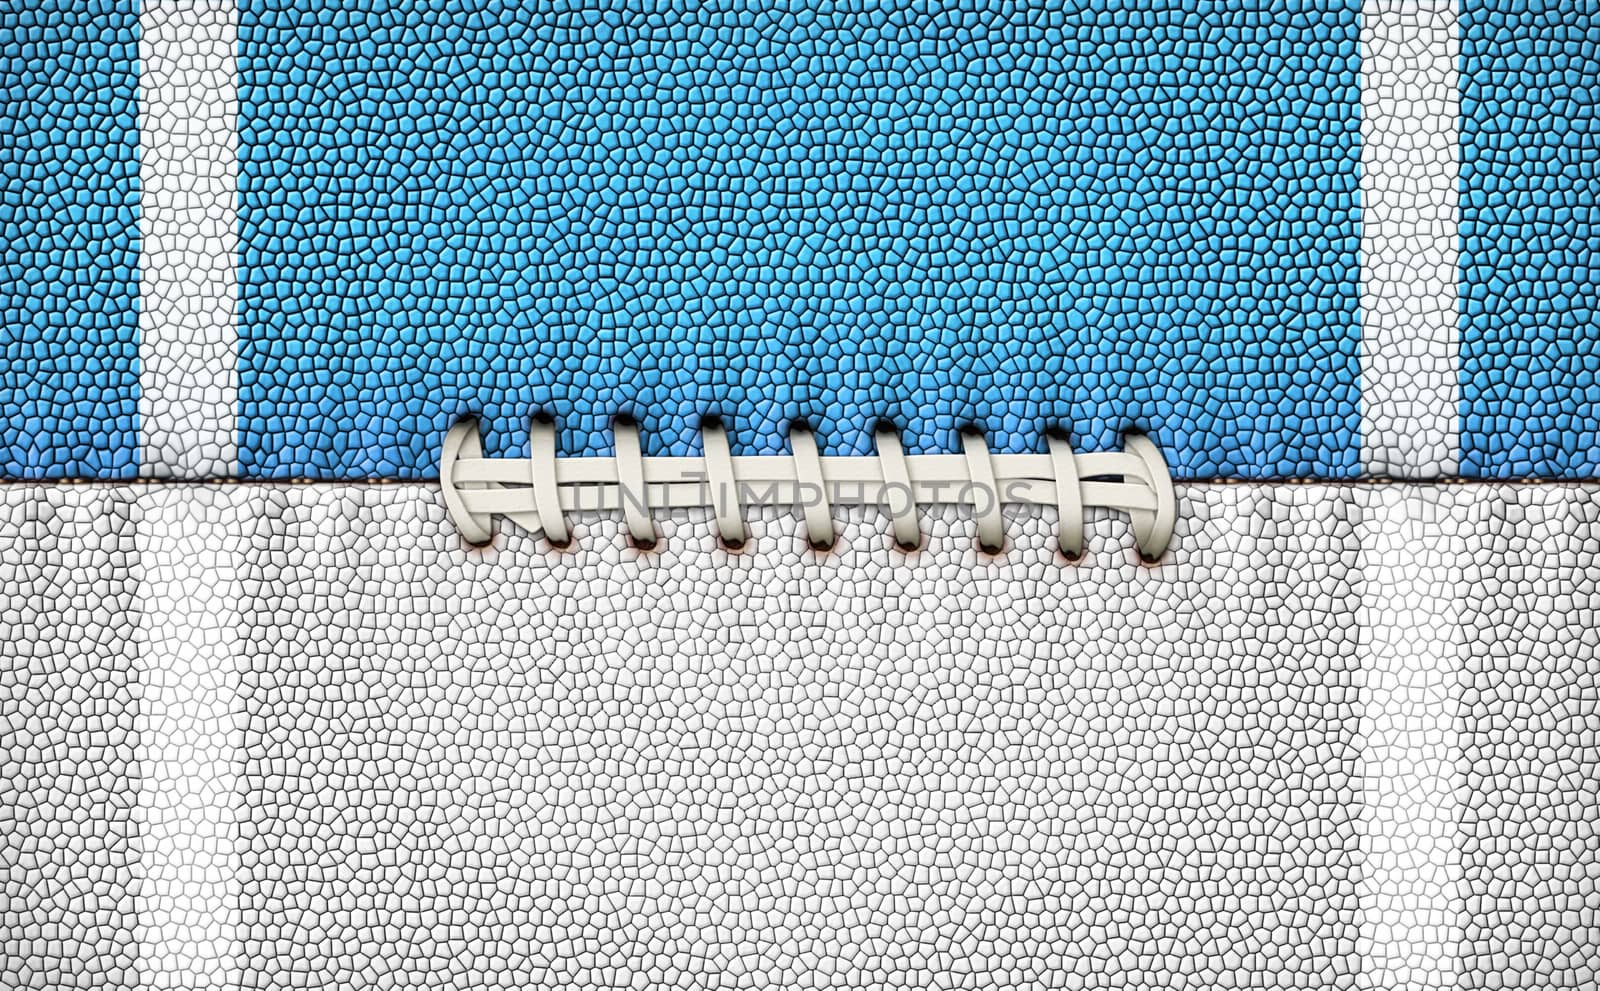 Digital Illustration of a footballÕs texture, laces, and stripes to use as a background for text or other graphics.